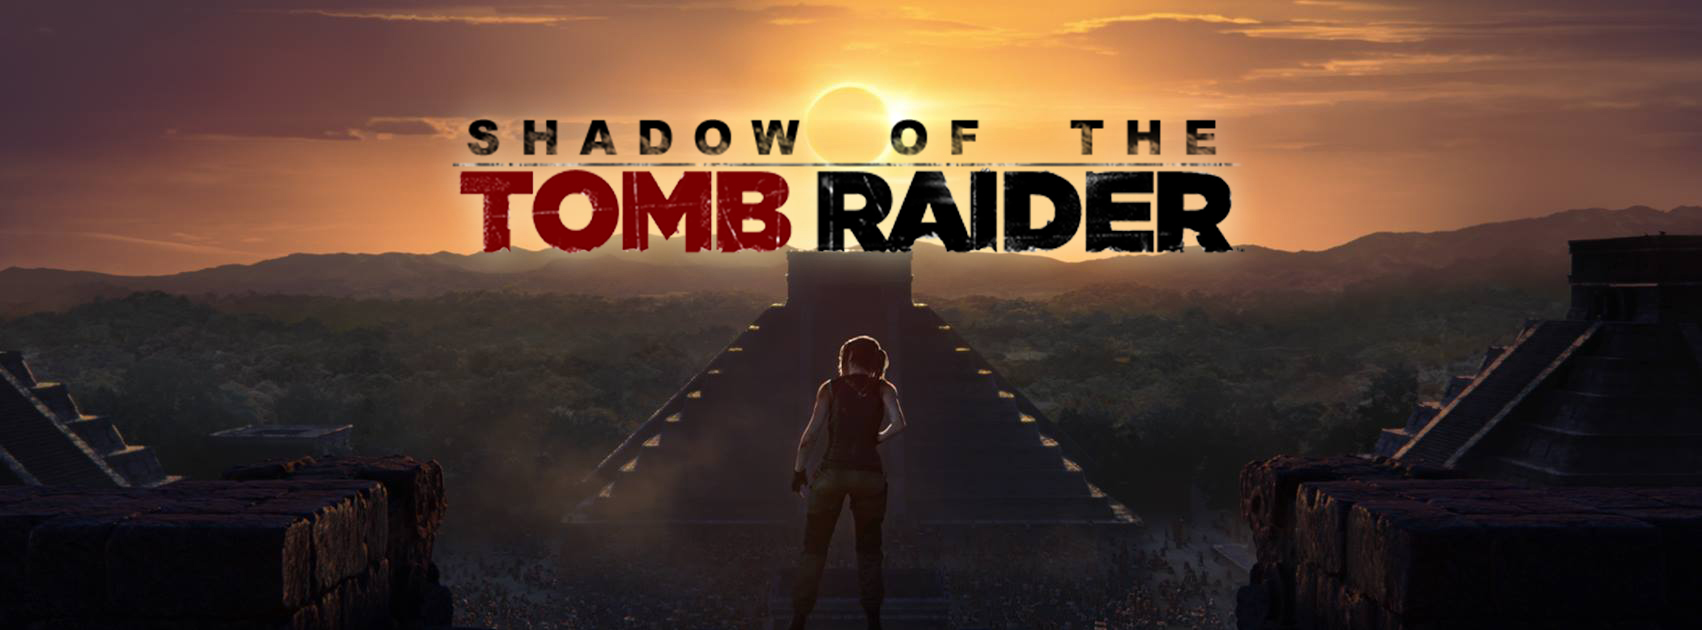 Shadow of the Tomb Raider banner